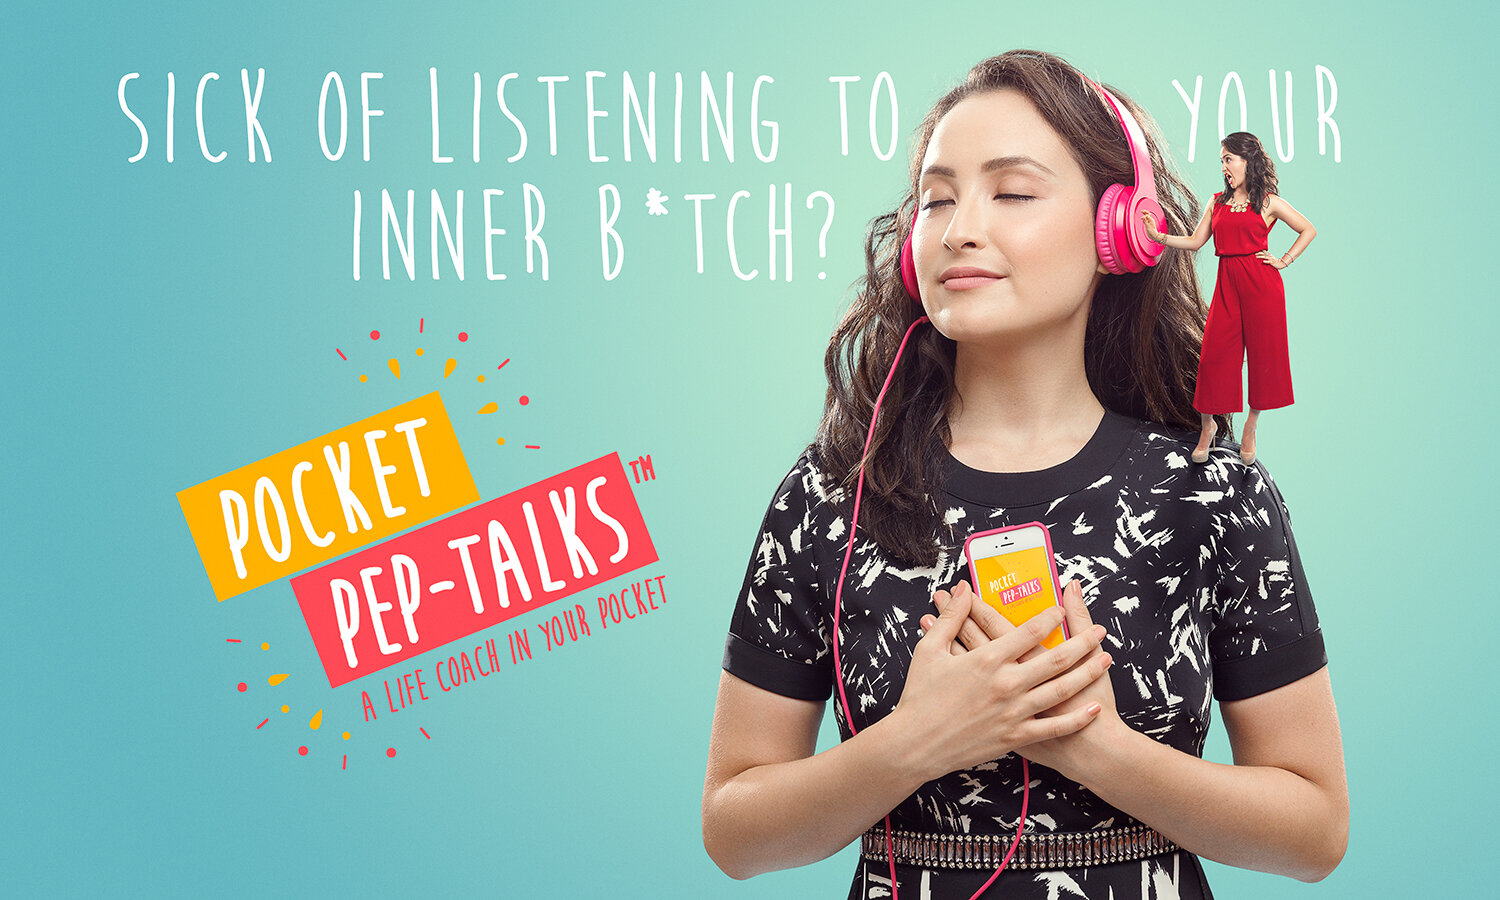 Creative commercial photography: life coach Catherine Geller listens to Pocket Pep-Talks to drown out inner b.